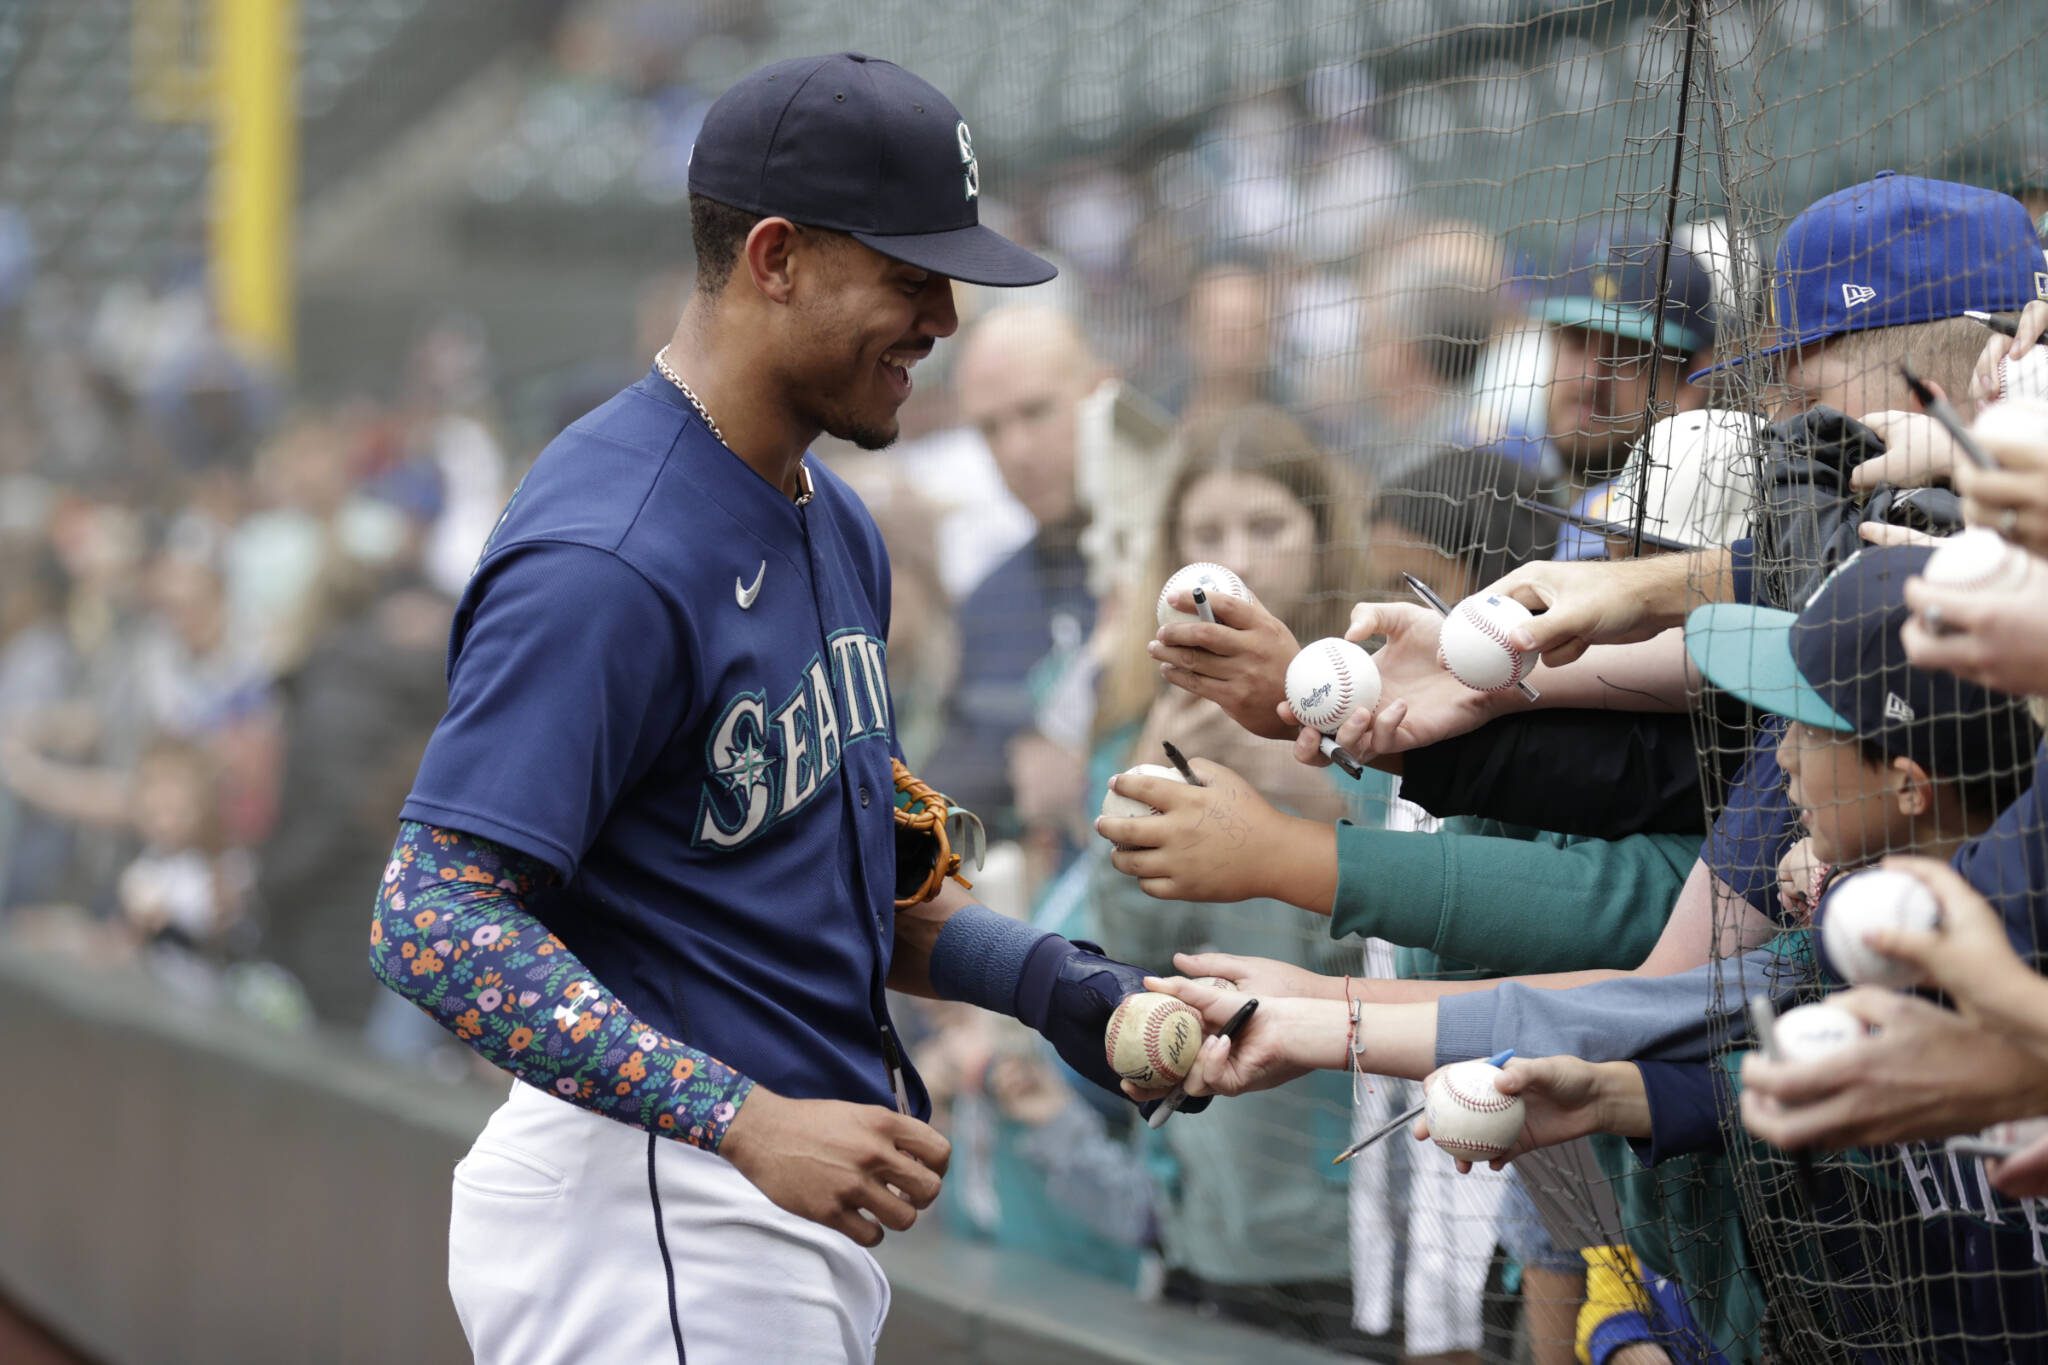 The Mariners’ Julio Rodriguez signs autographs for fans before a game against the Tigers on Oct. 5, 2022, in Seattle. (AP Photo/John Froschauer)